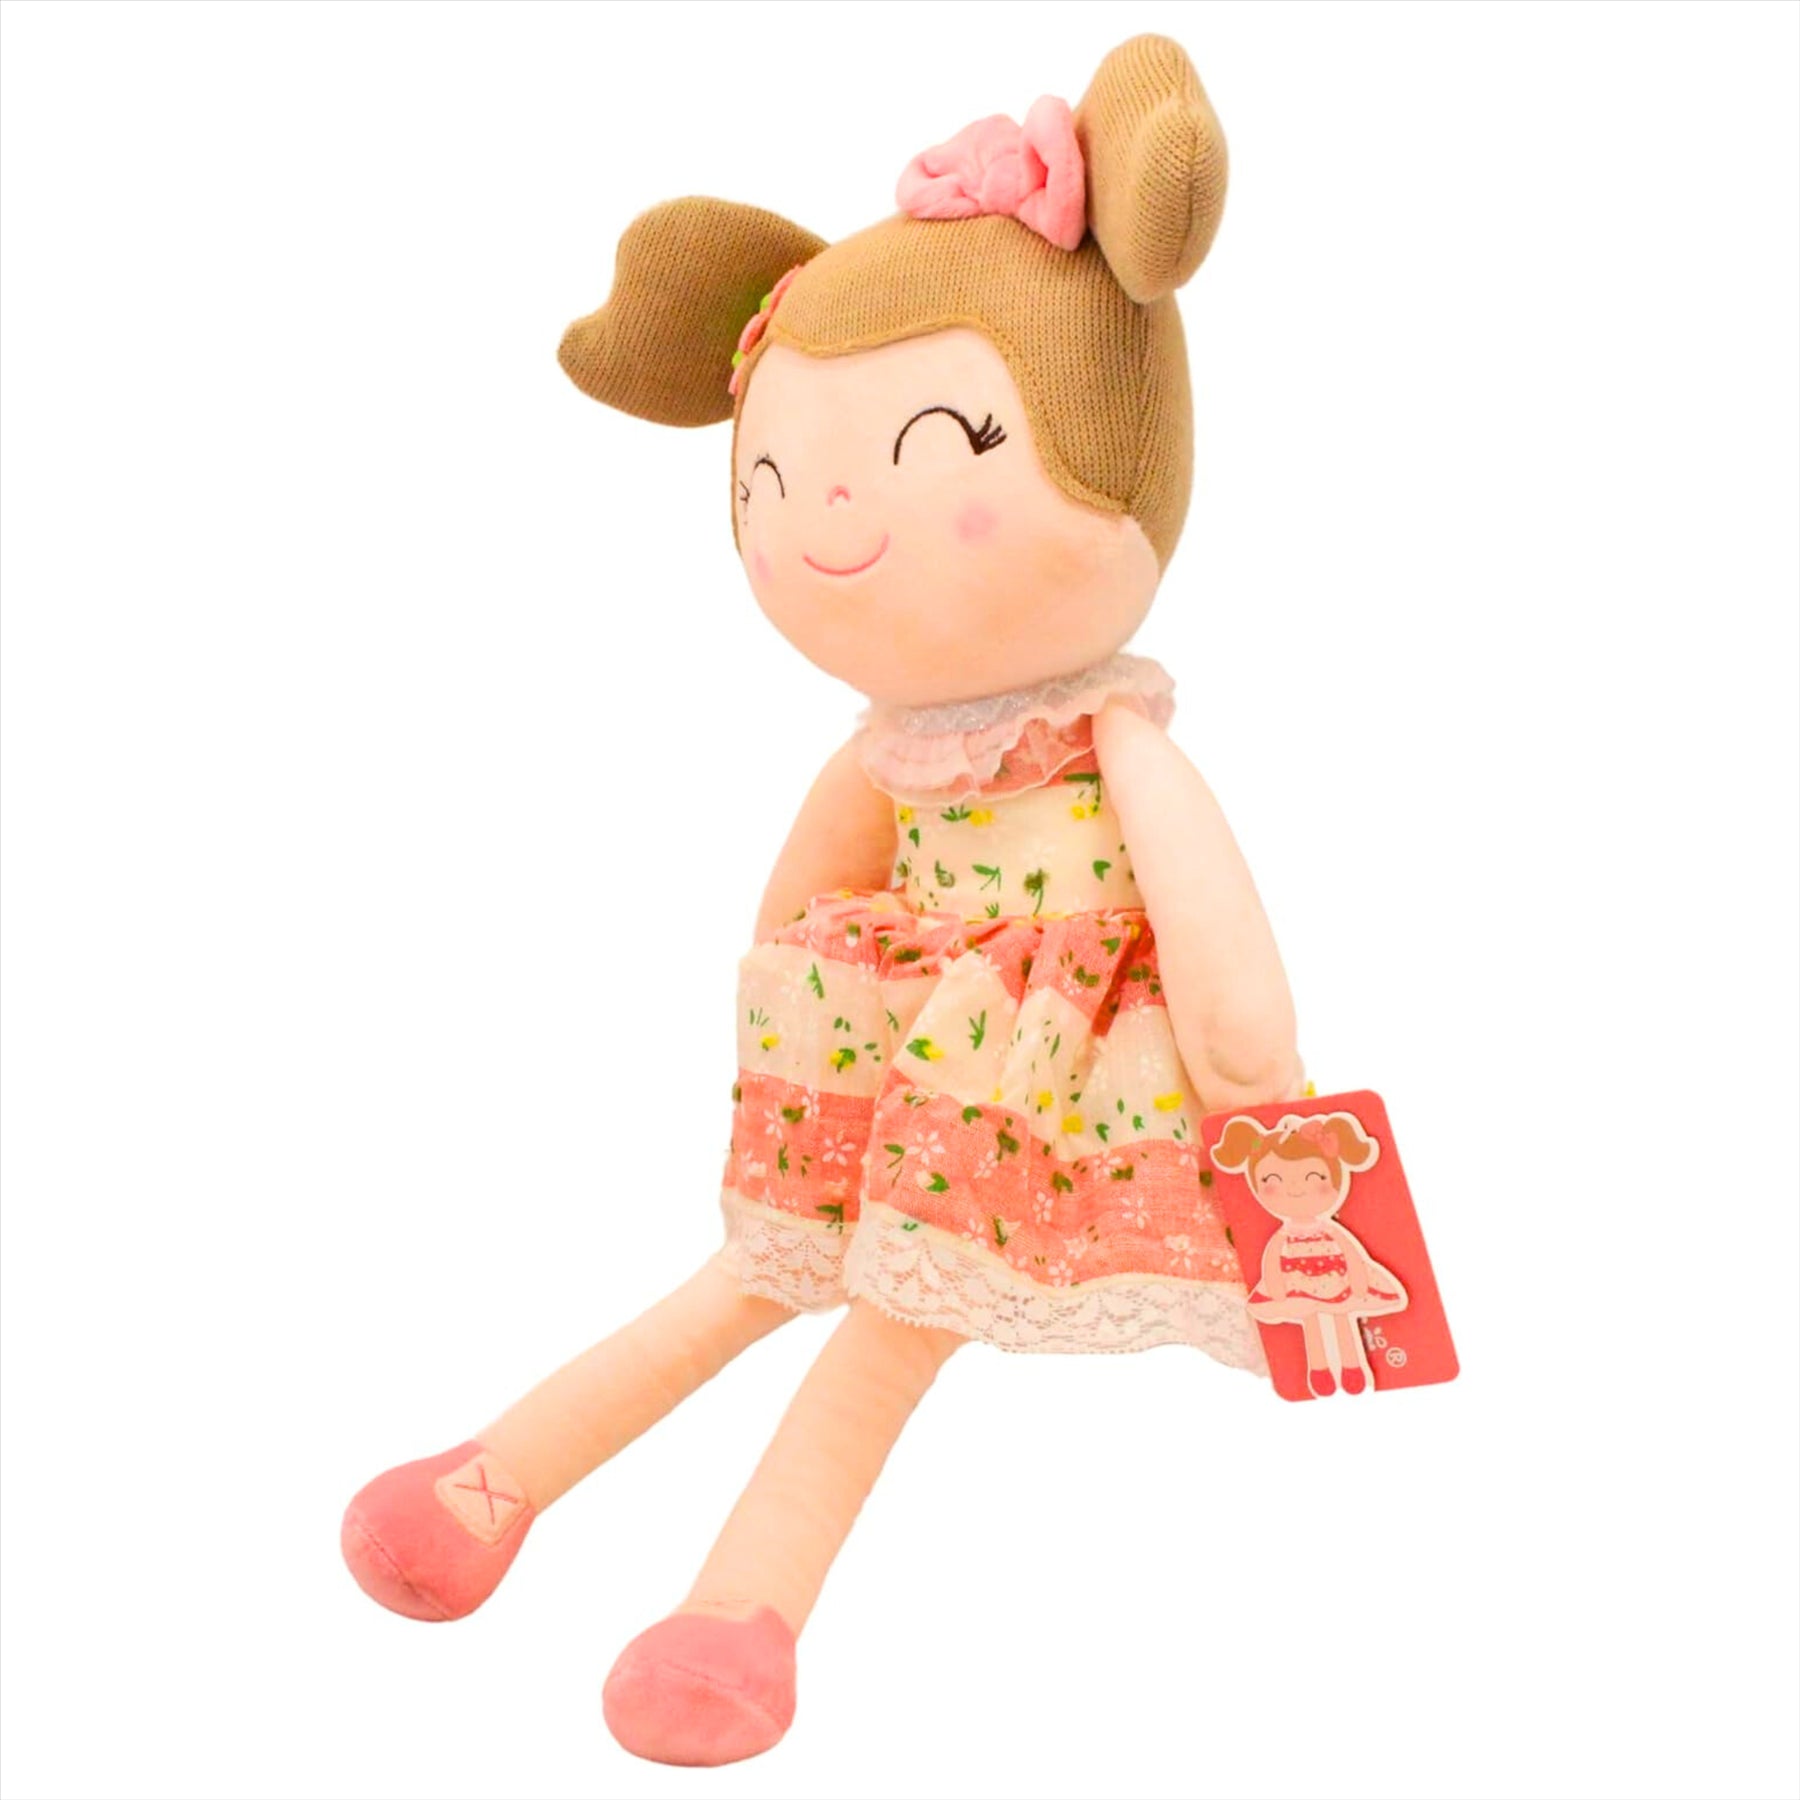 Gloveleya Super Soft Embroidered Pink Spring 40cm Plush Doll with 42 Glow in the Dark Owls and Stars - Toptoys2u